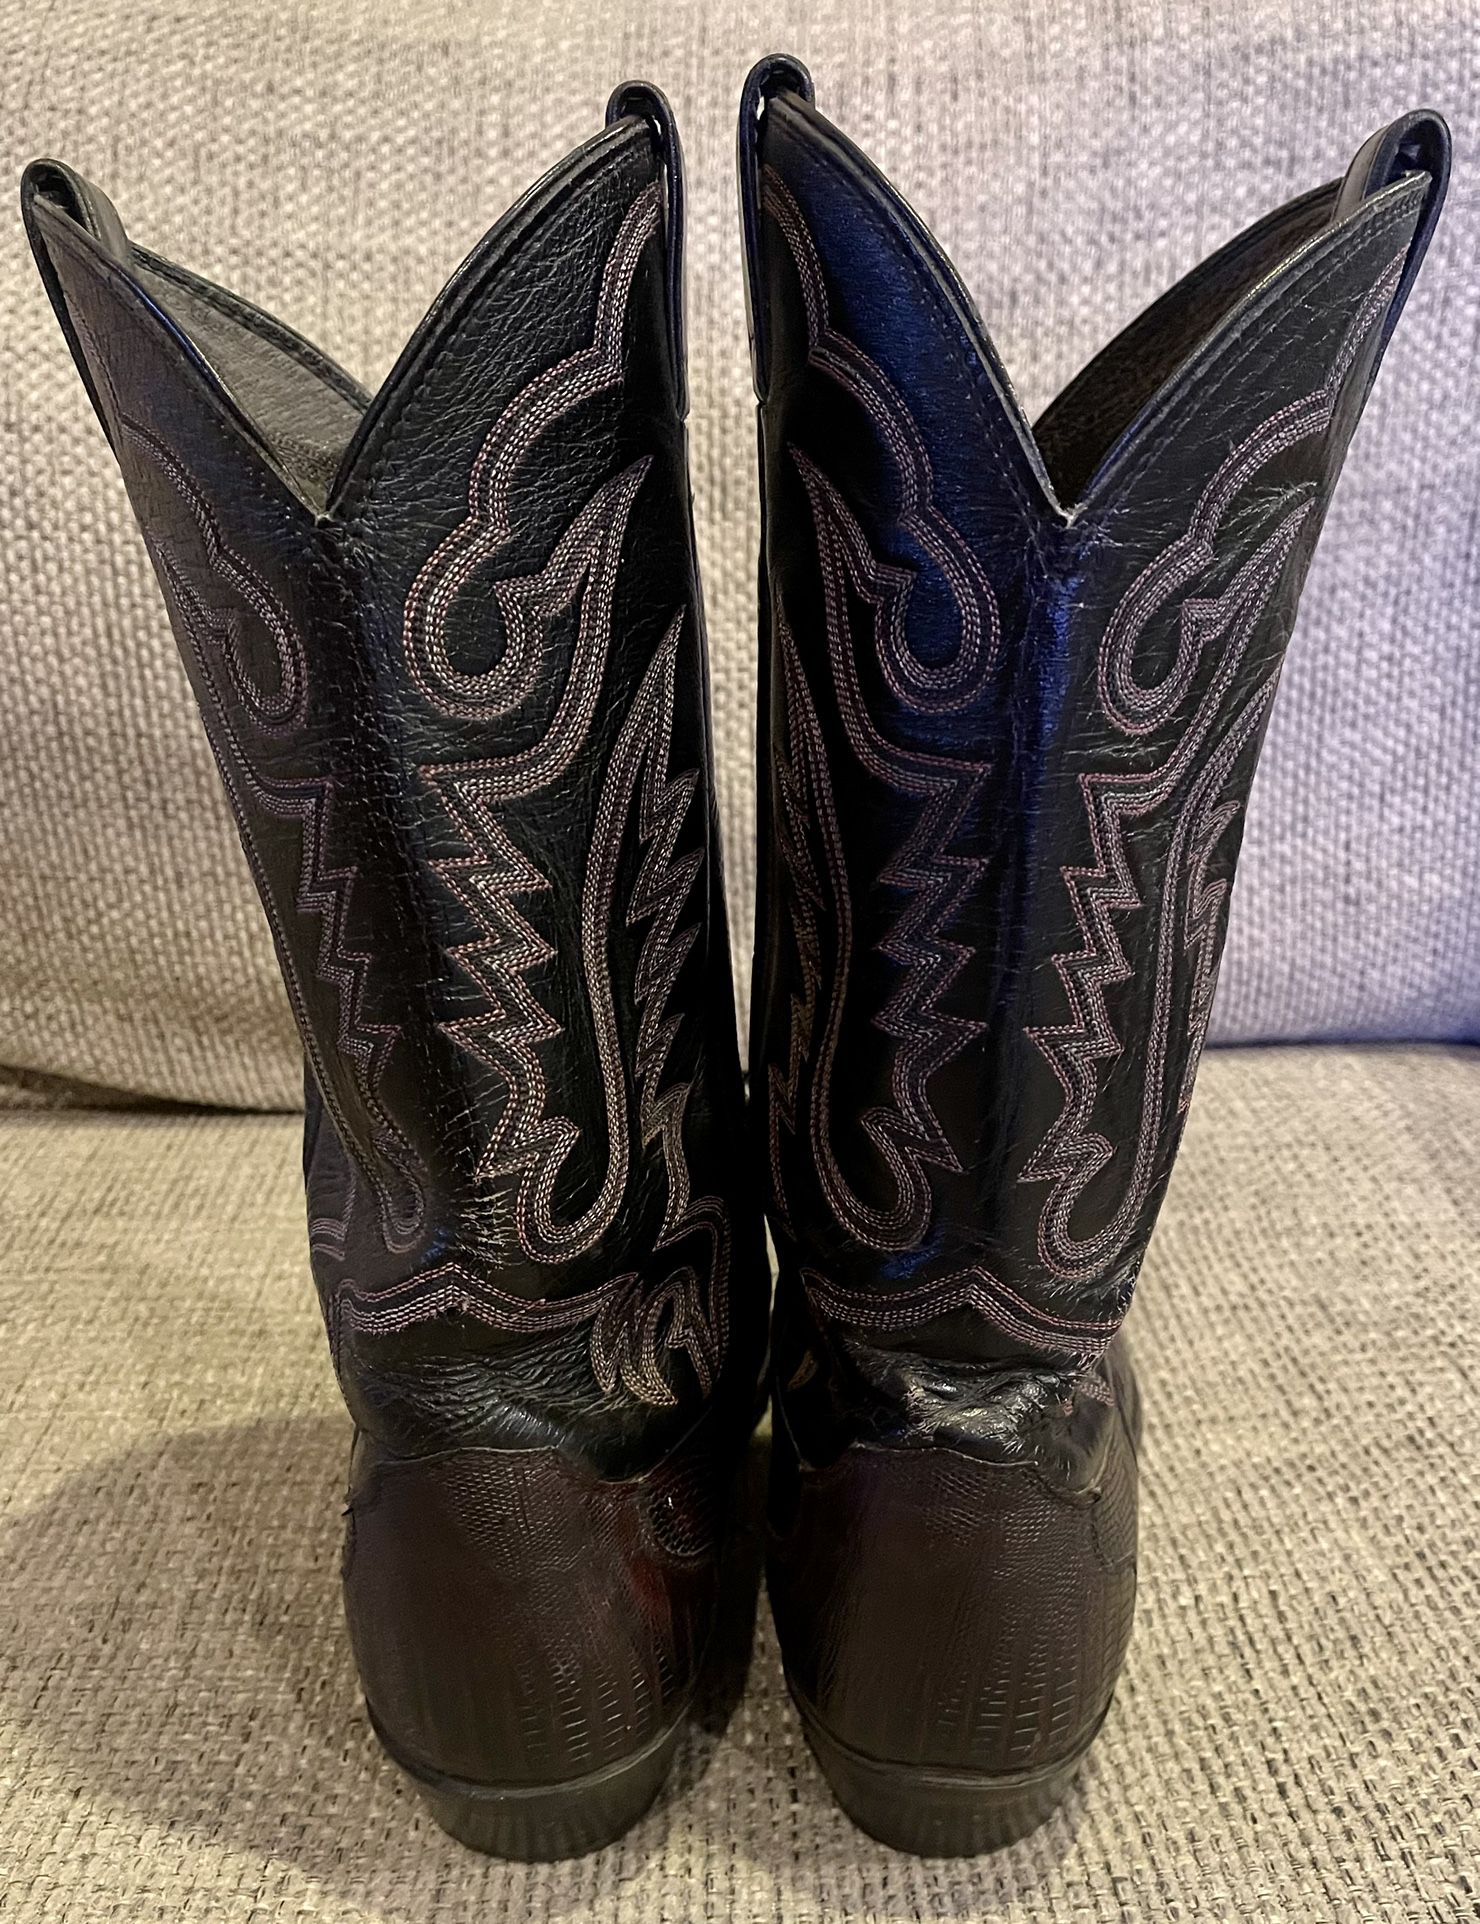 Justin Cowboy Boots Men's Size 10.5EE Style 9156 for Sale in Fresno, CA ...